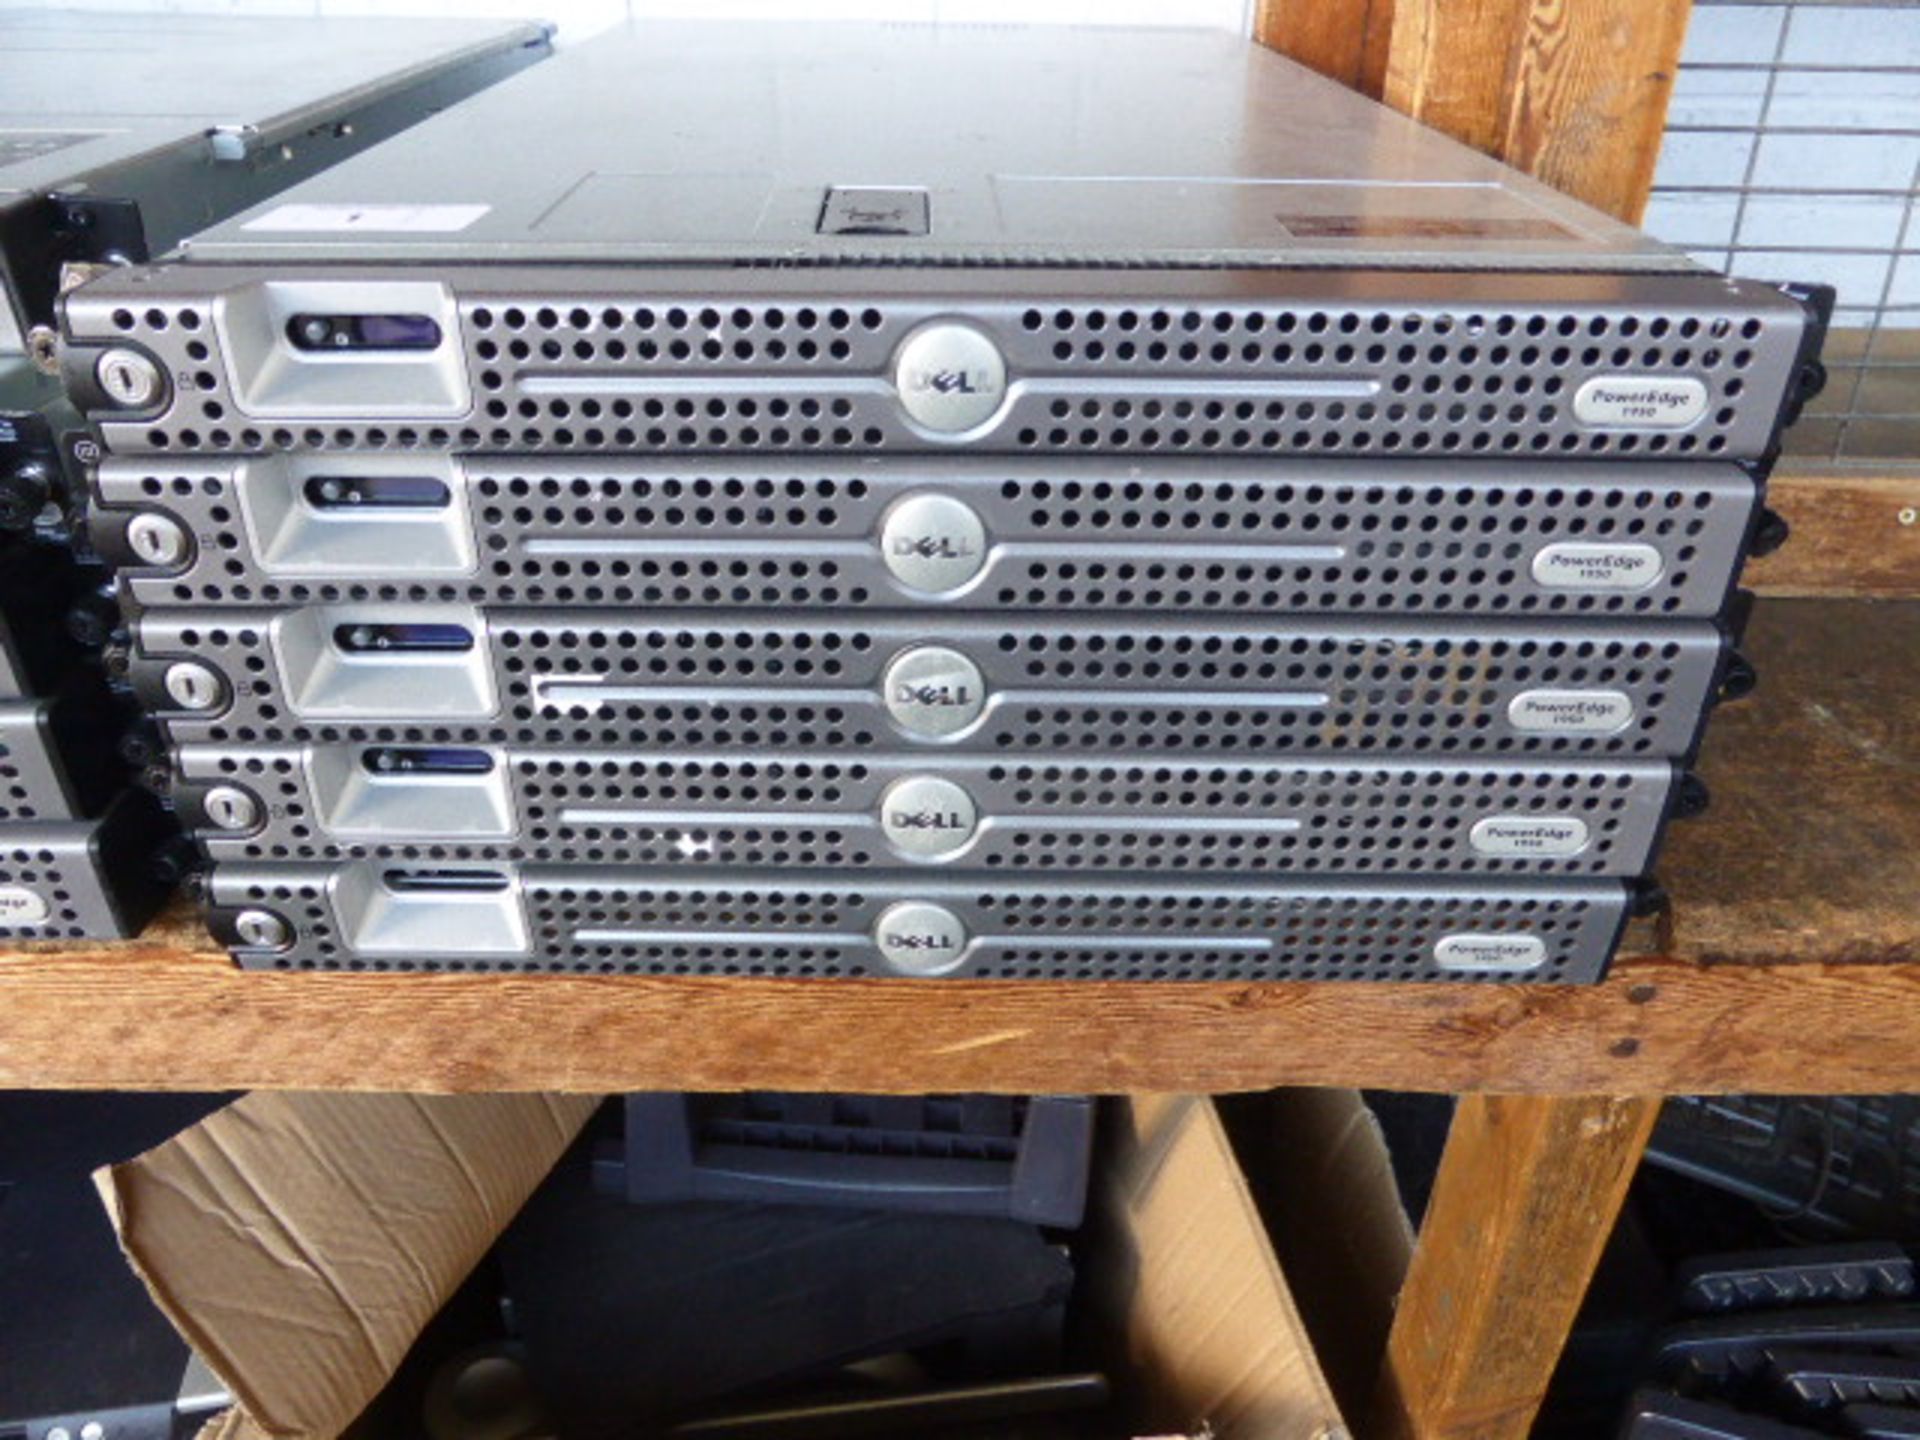 5 Dell PowerEdge 1950 rack mounted servers with no hard drives